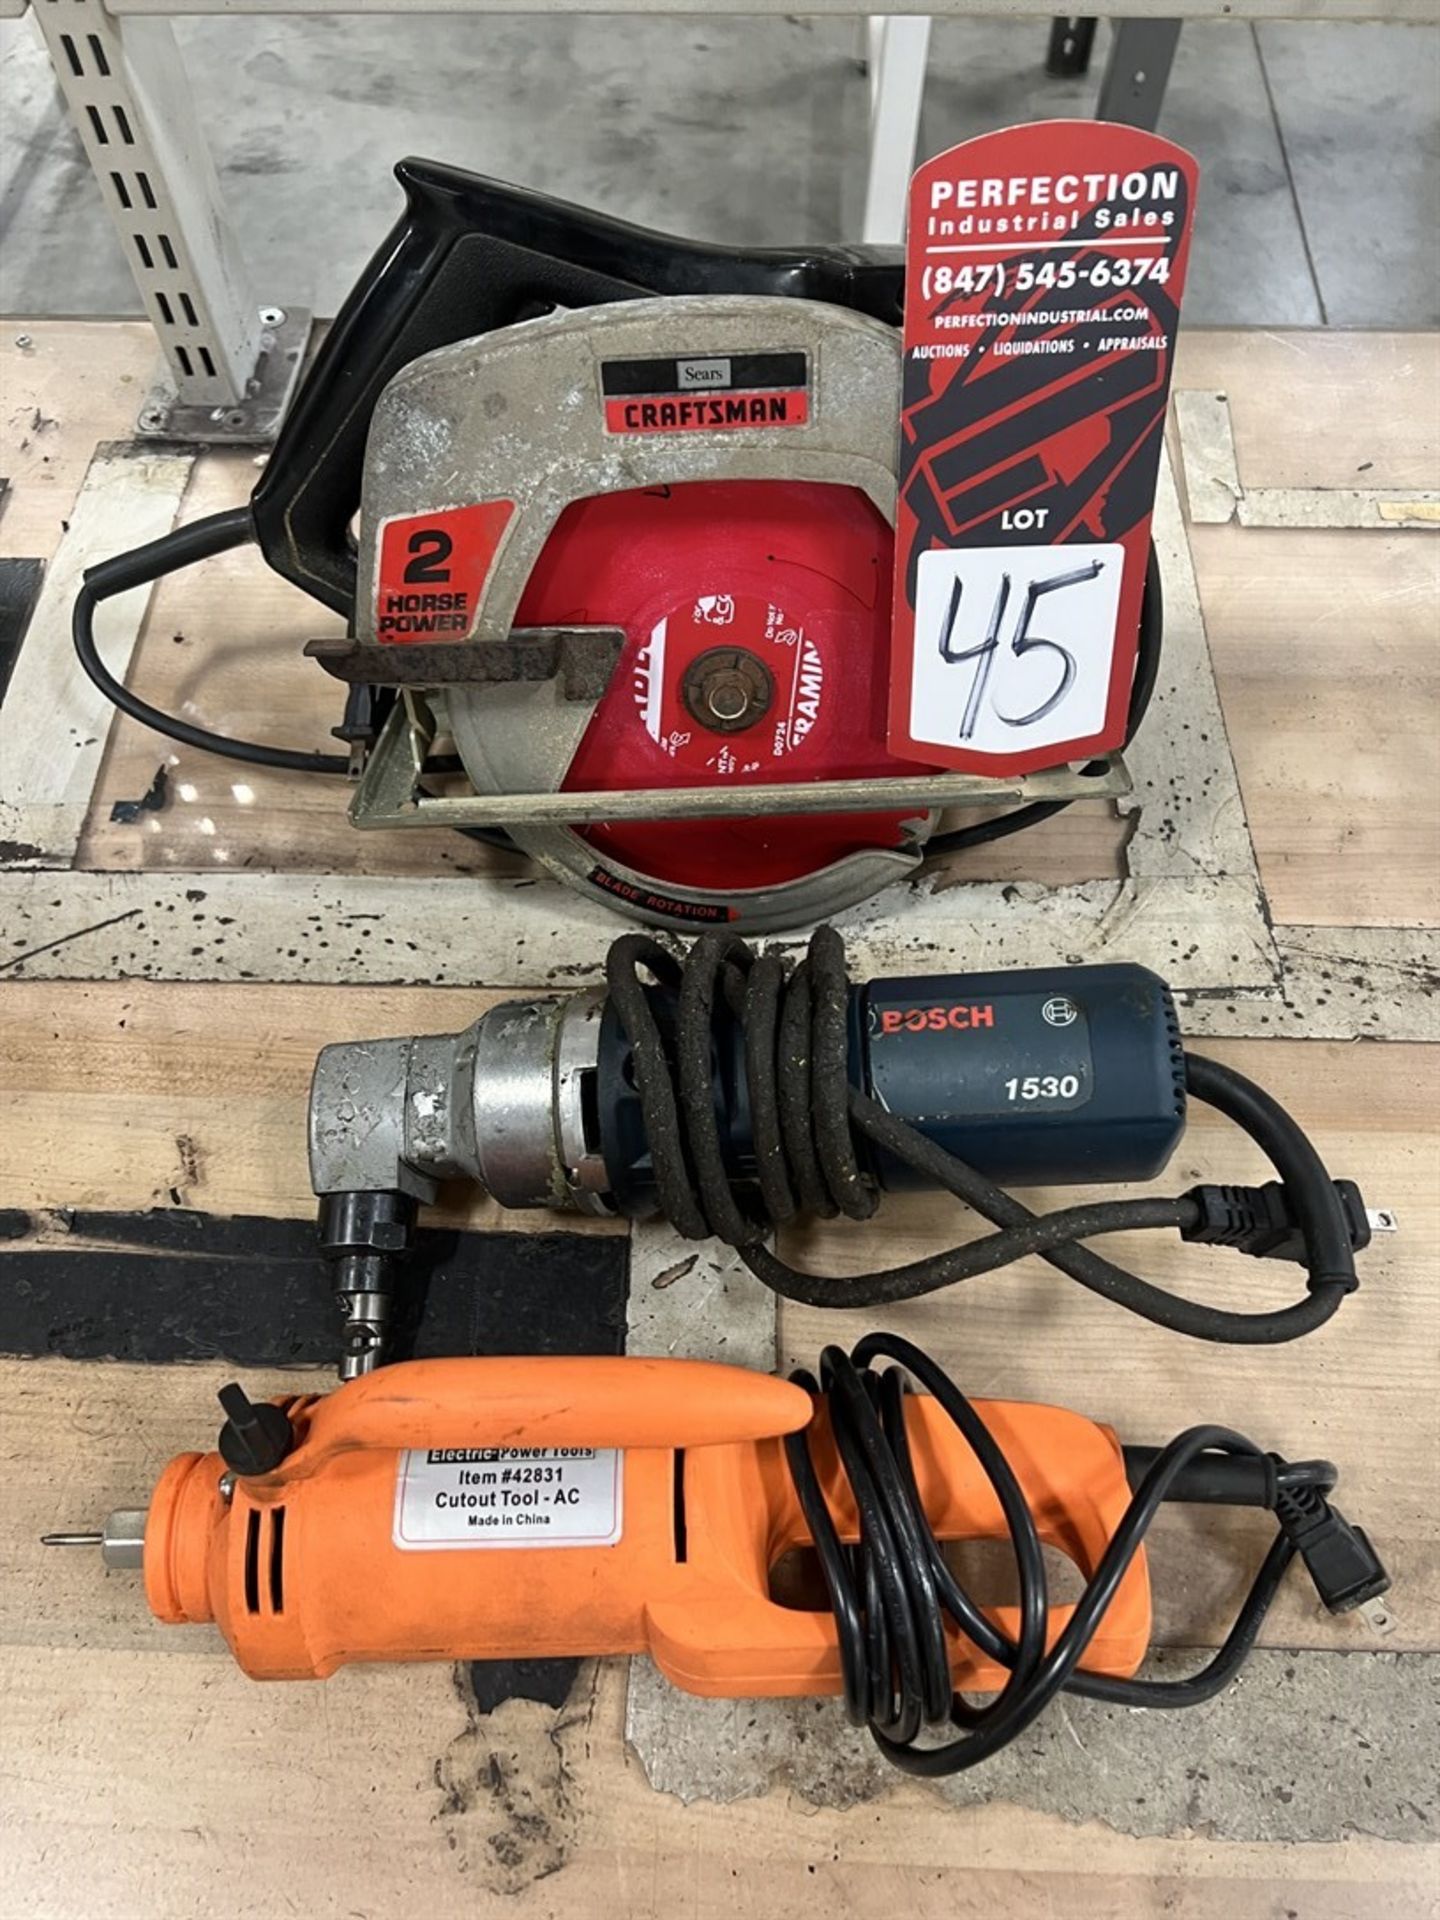 Lot Comprising CRAFTSMAN 7-1/4" Circular Saw, BOSCH 1530 Nibbler, and CHICAGO ELECTRIC 42831 Cut Out